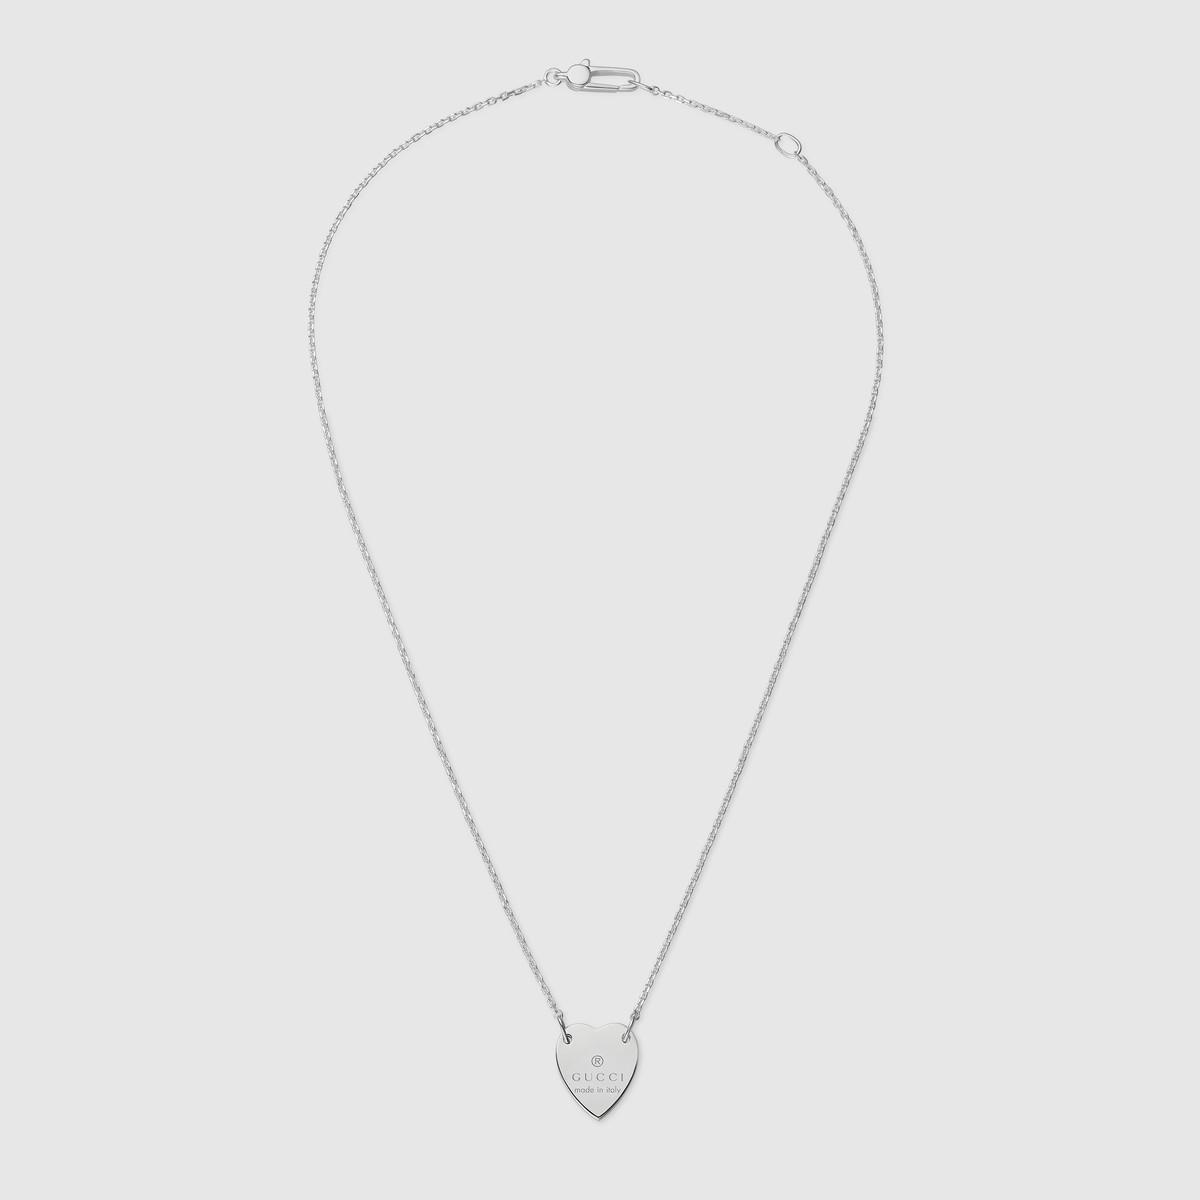 Gucci Necklace With Heart Pendant - Sterling Silver | ModeSens